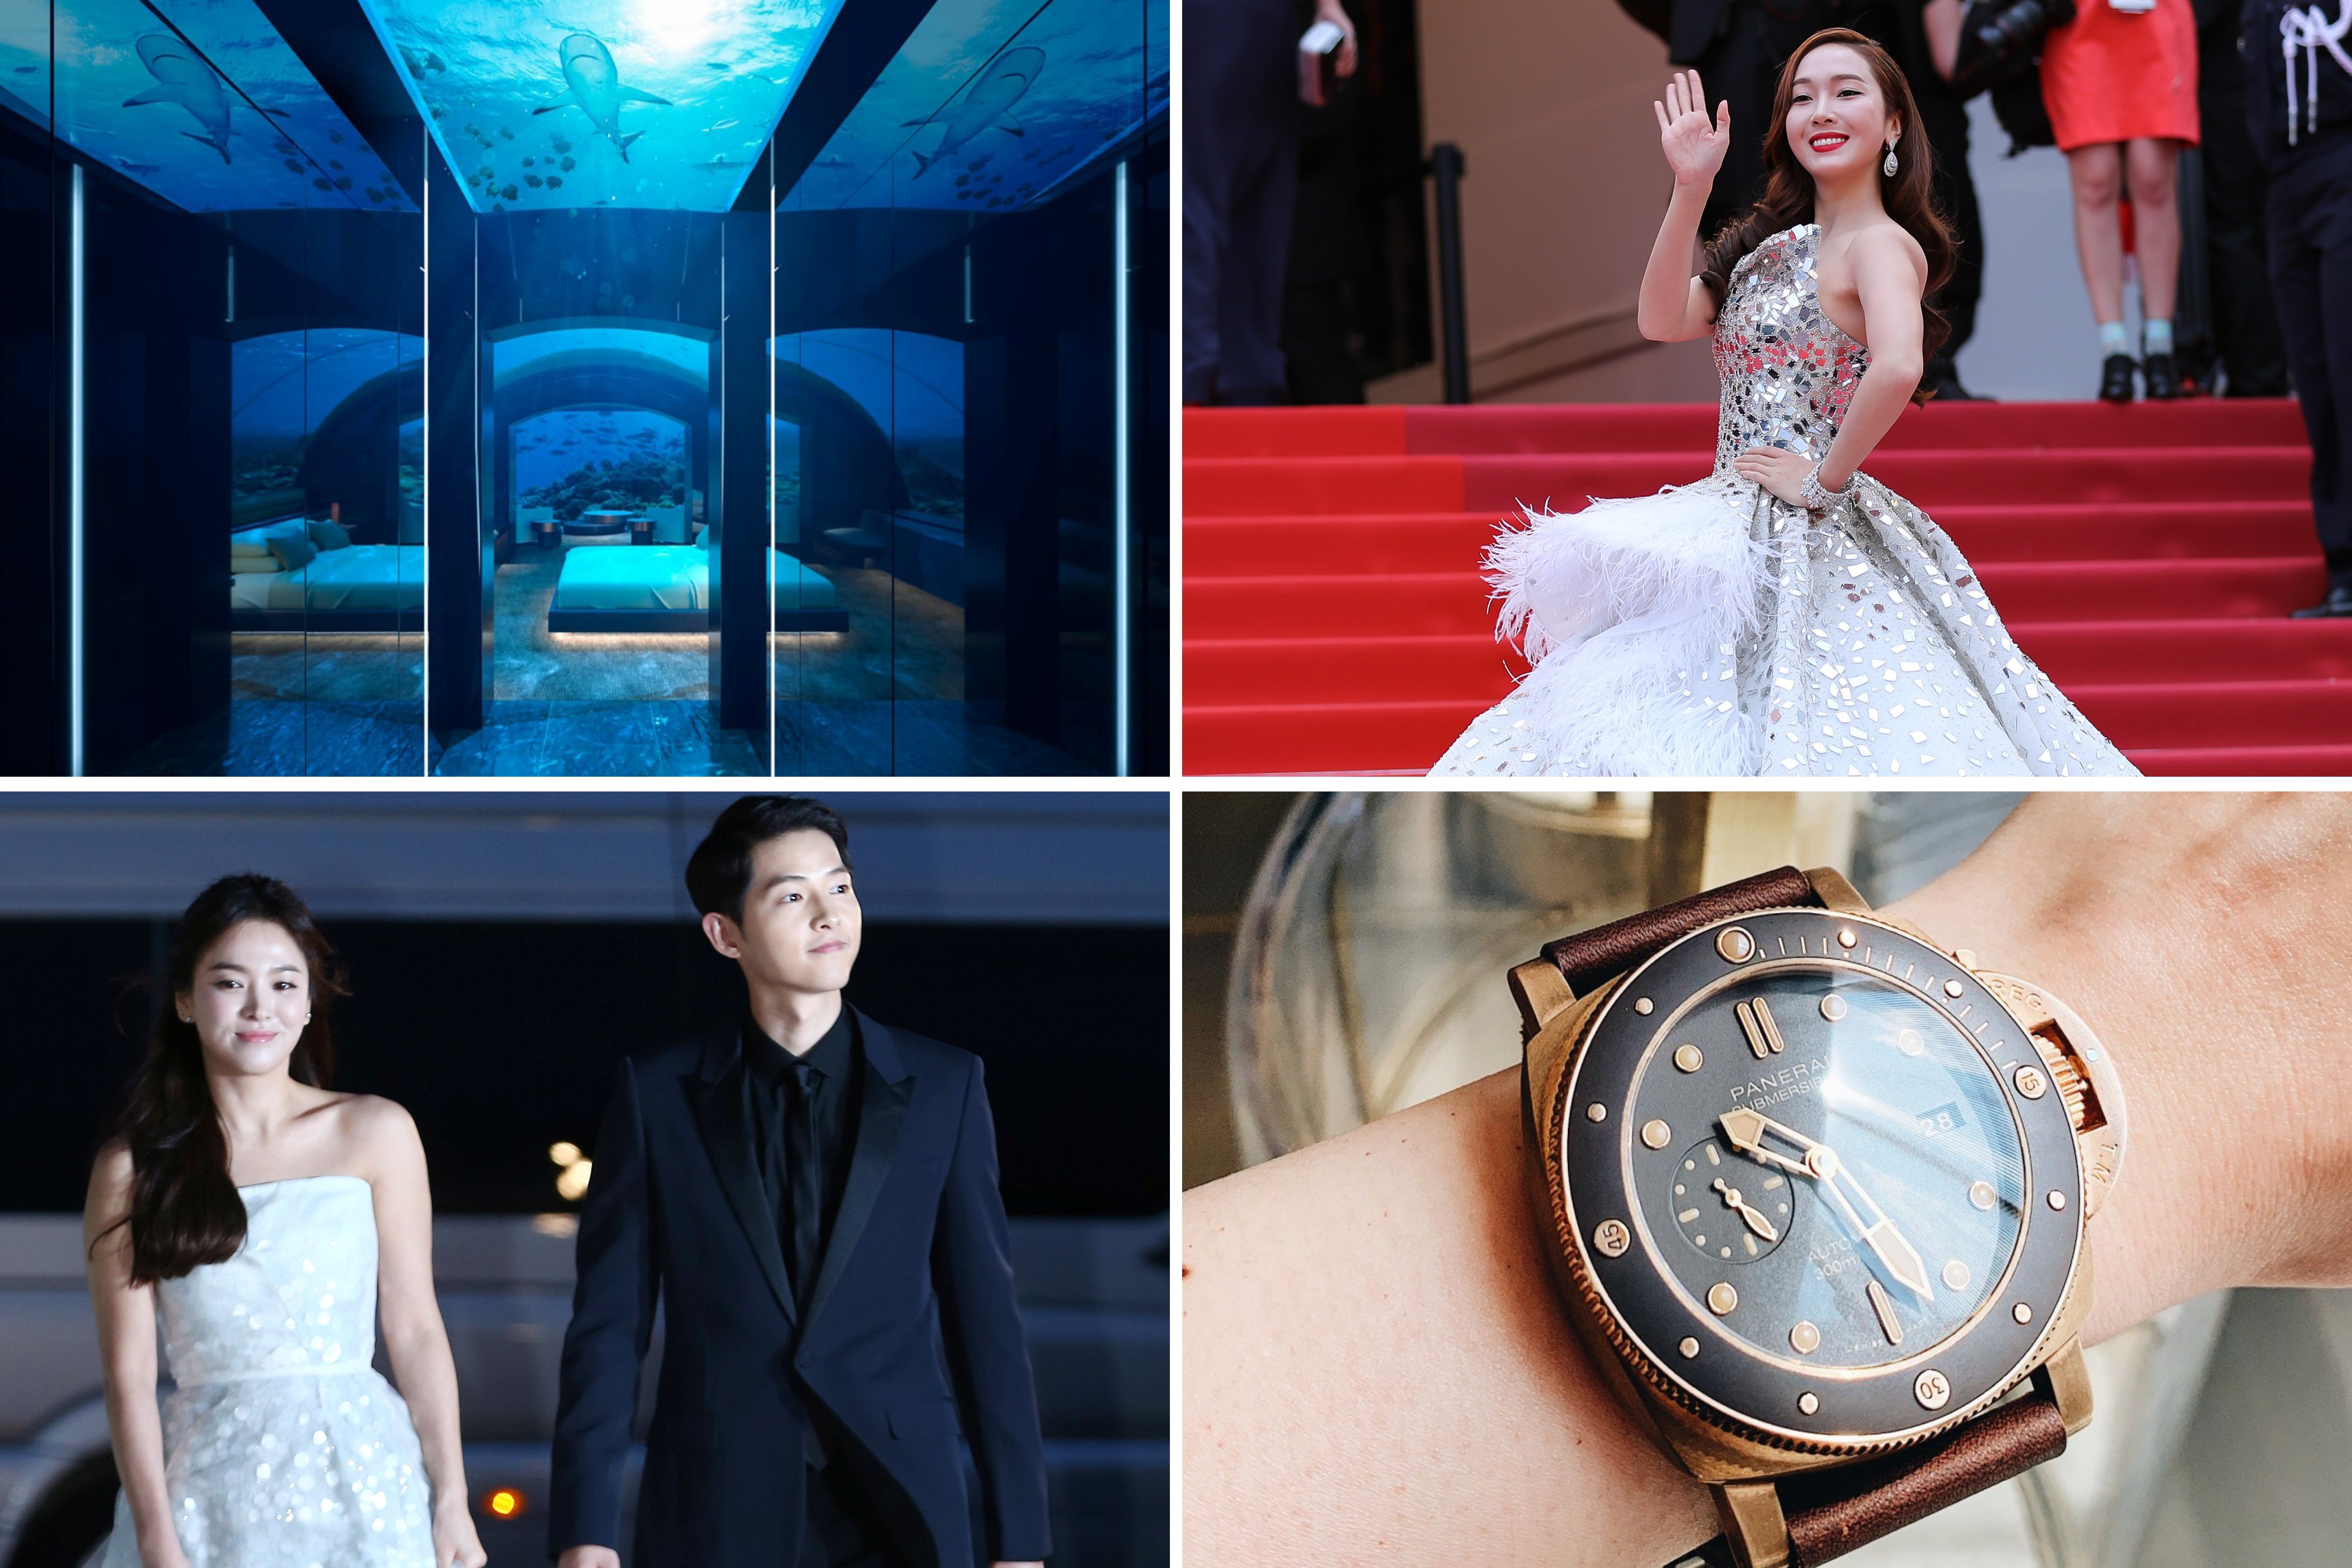 Clockwise, from top right: The Muraka underwater villa in the Maldives; the most stylish fashionistas on the Cannes red carpet; the unboxing of a favourite Panerai watch; and why K-drama's Song-Song couple split –these were just some of STYLE’s most-watched videos in 2019.